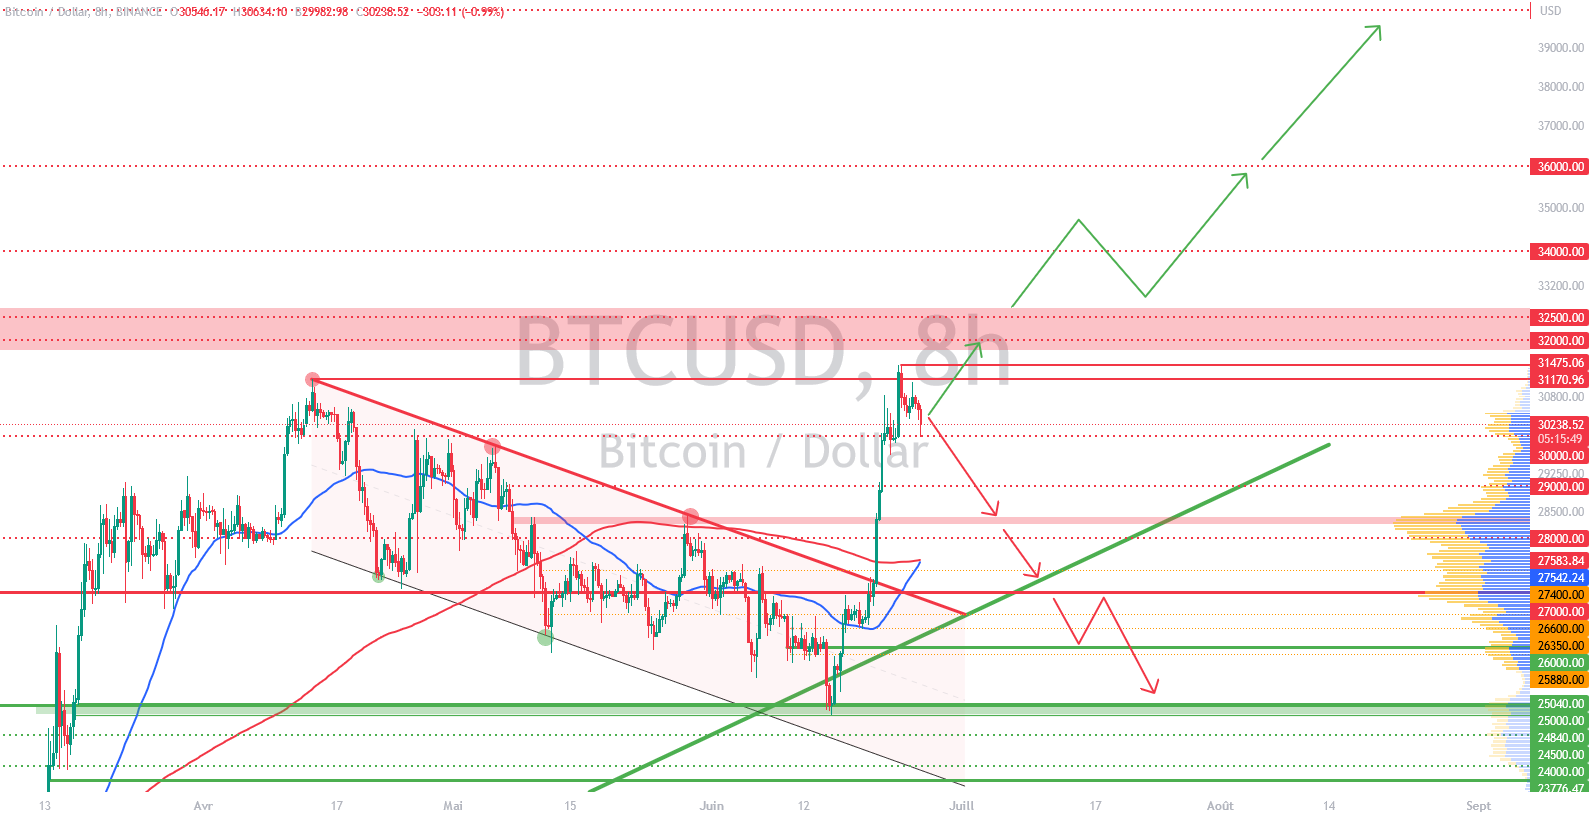 BTC/USD price chart over 8 hours
